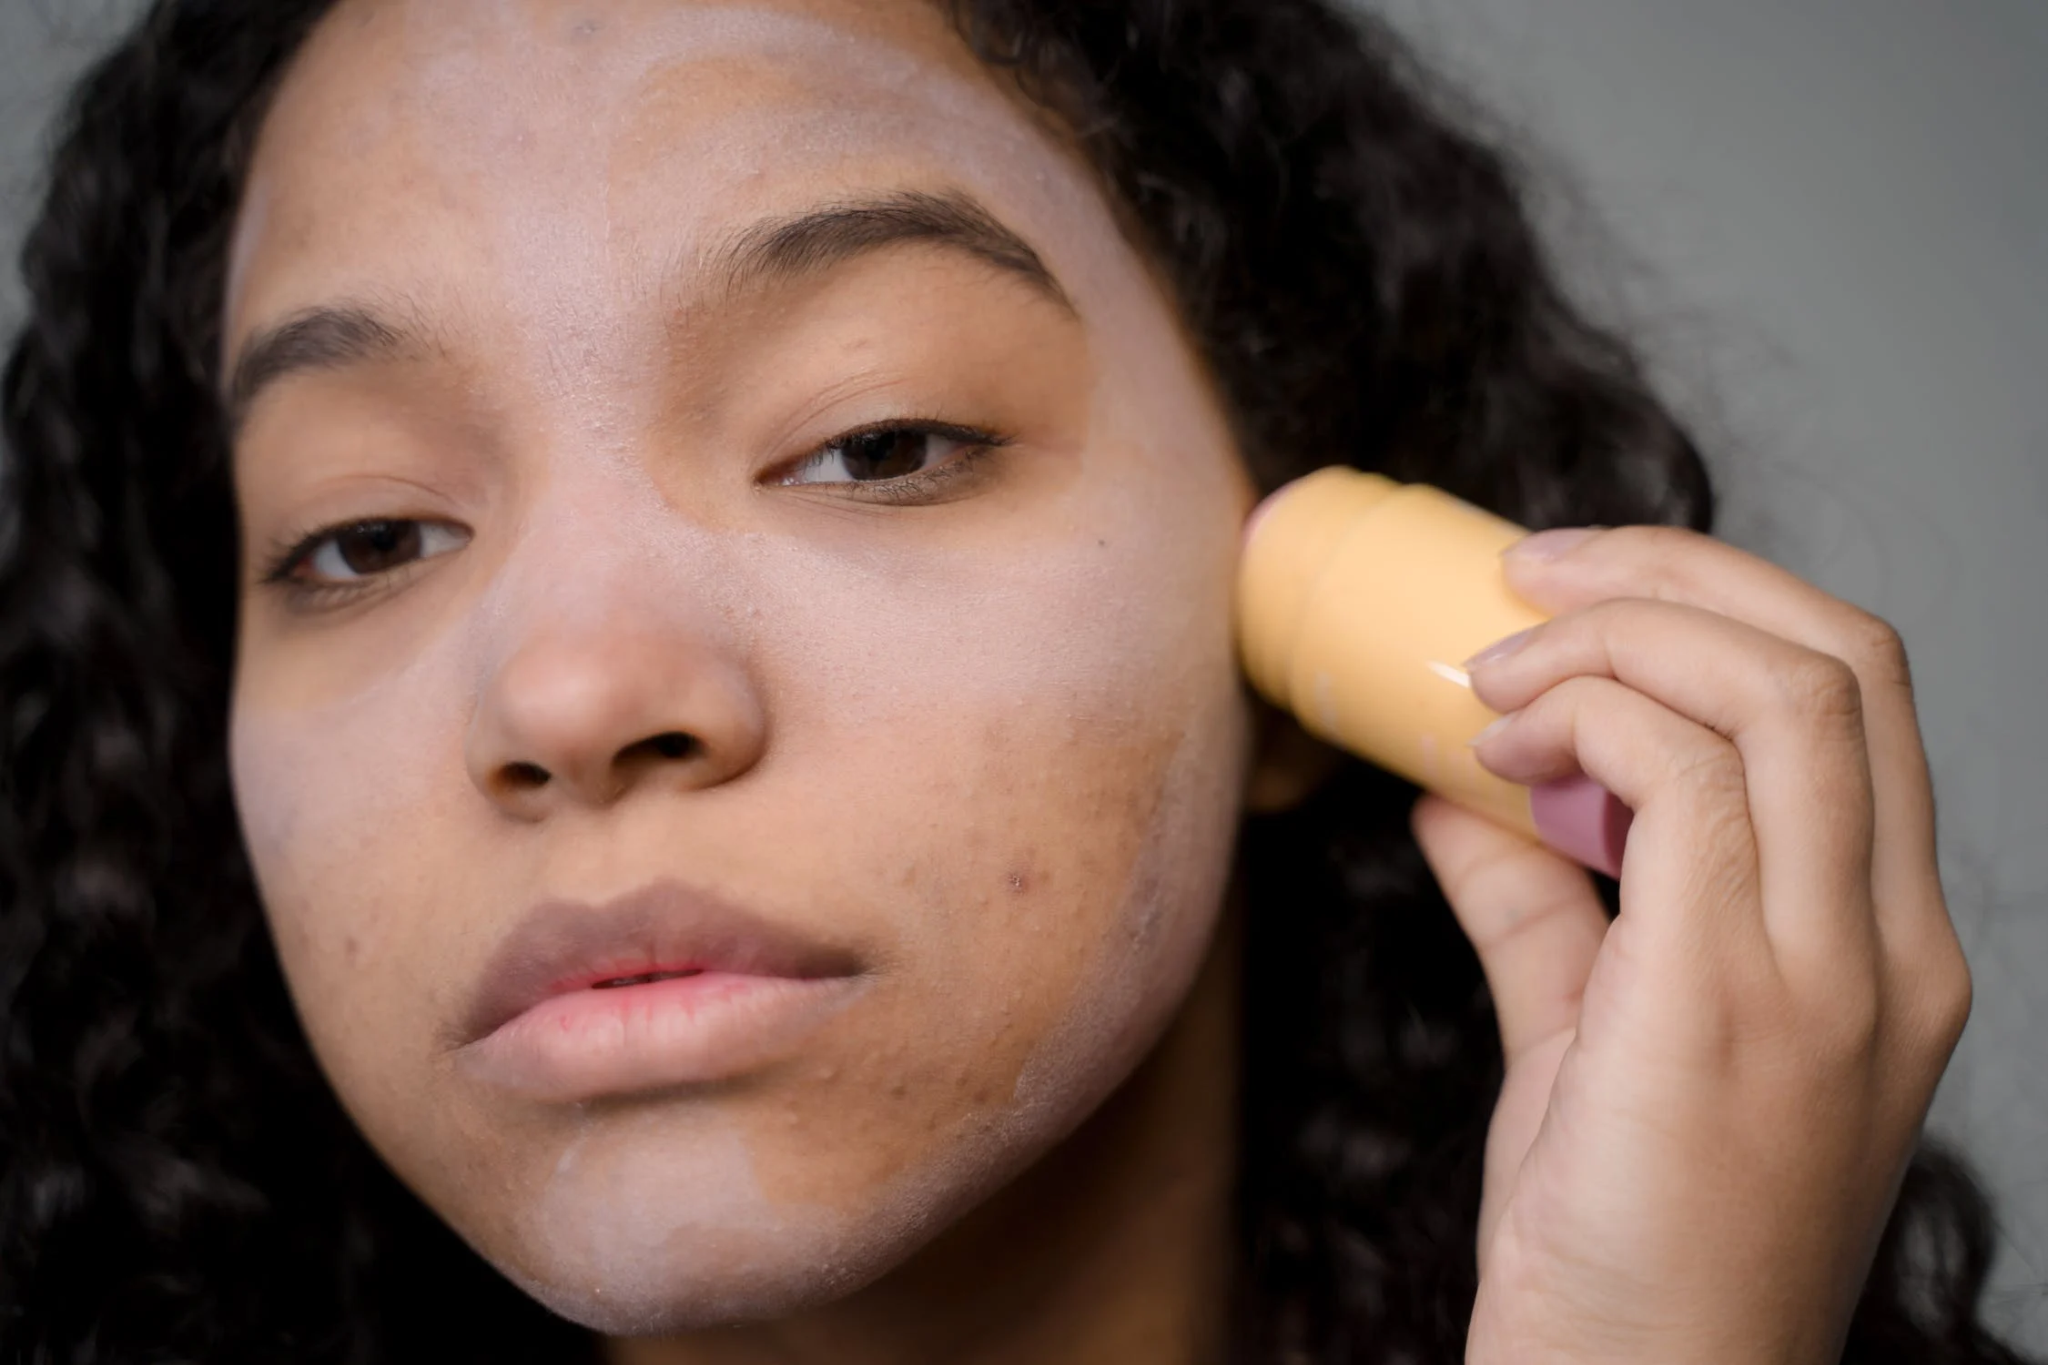 A woman covering her acne with makeup